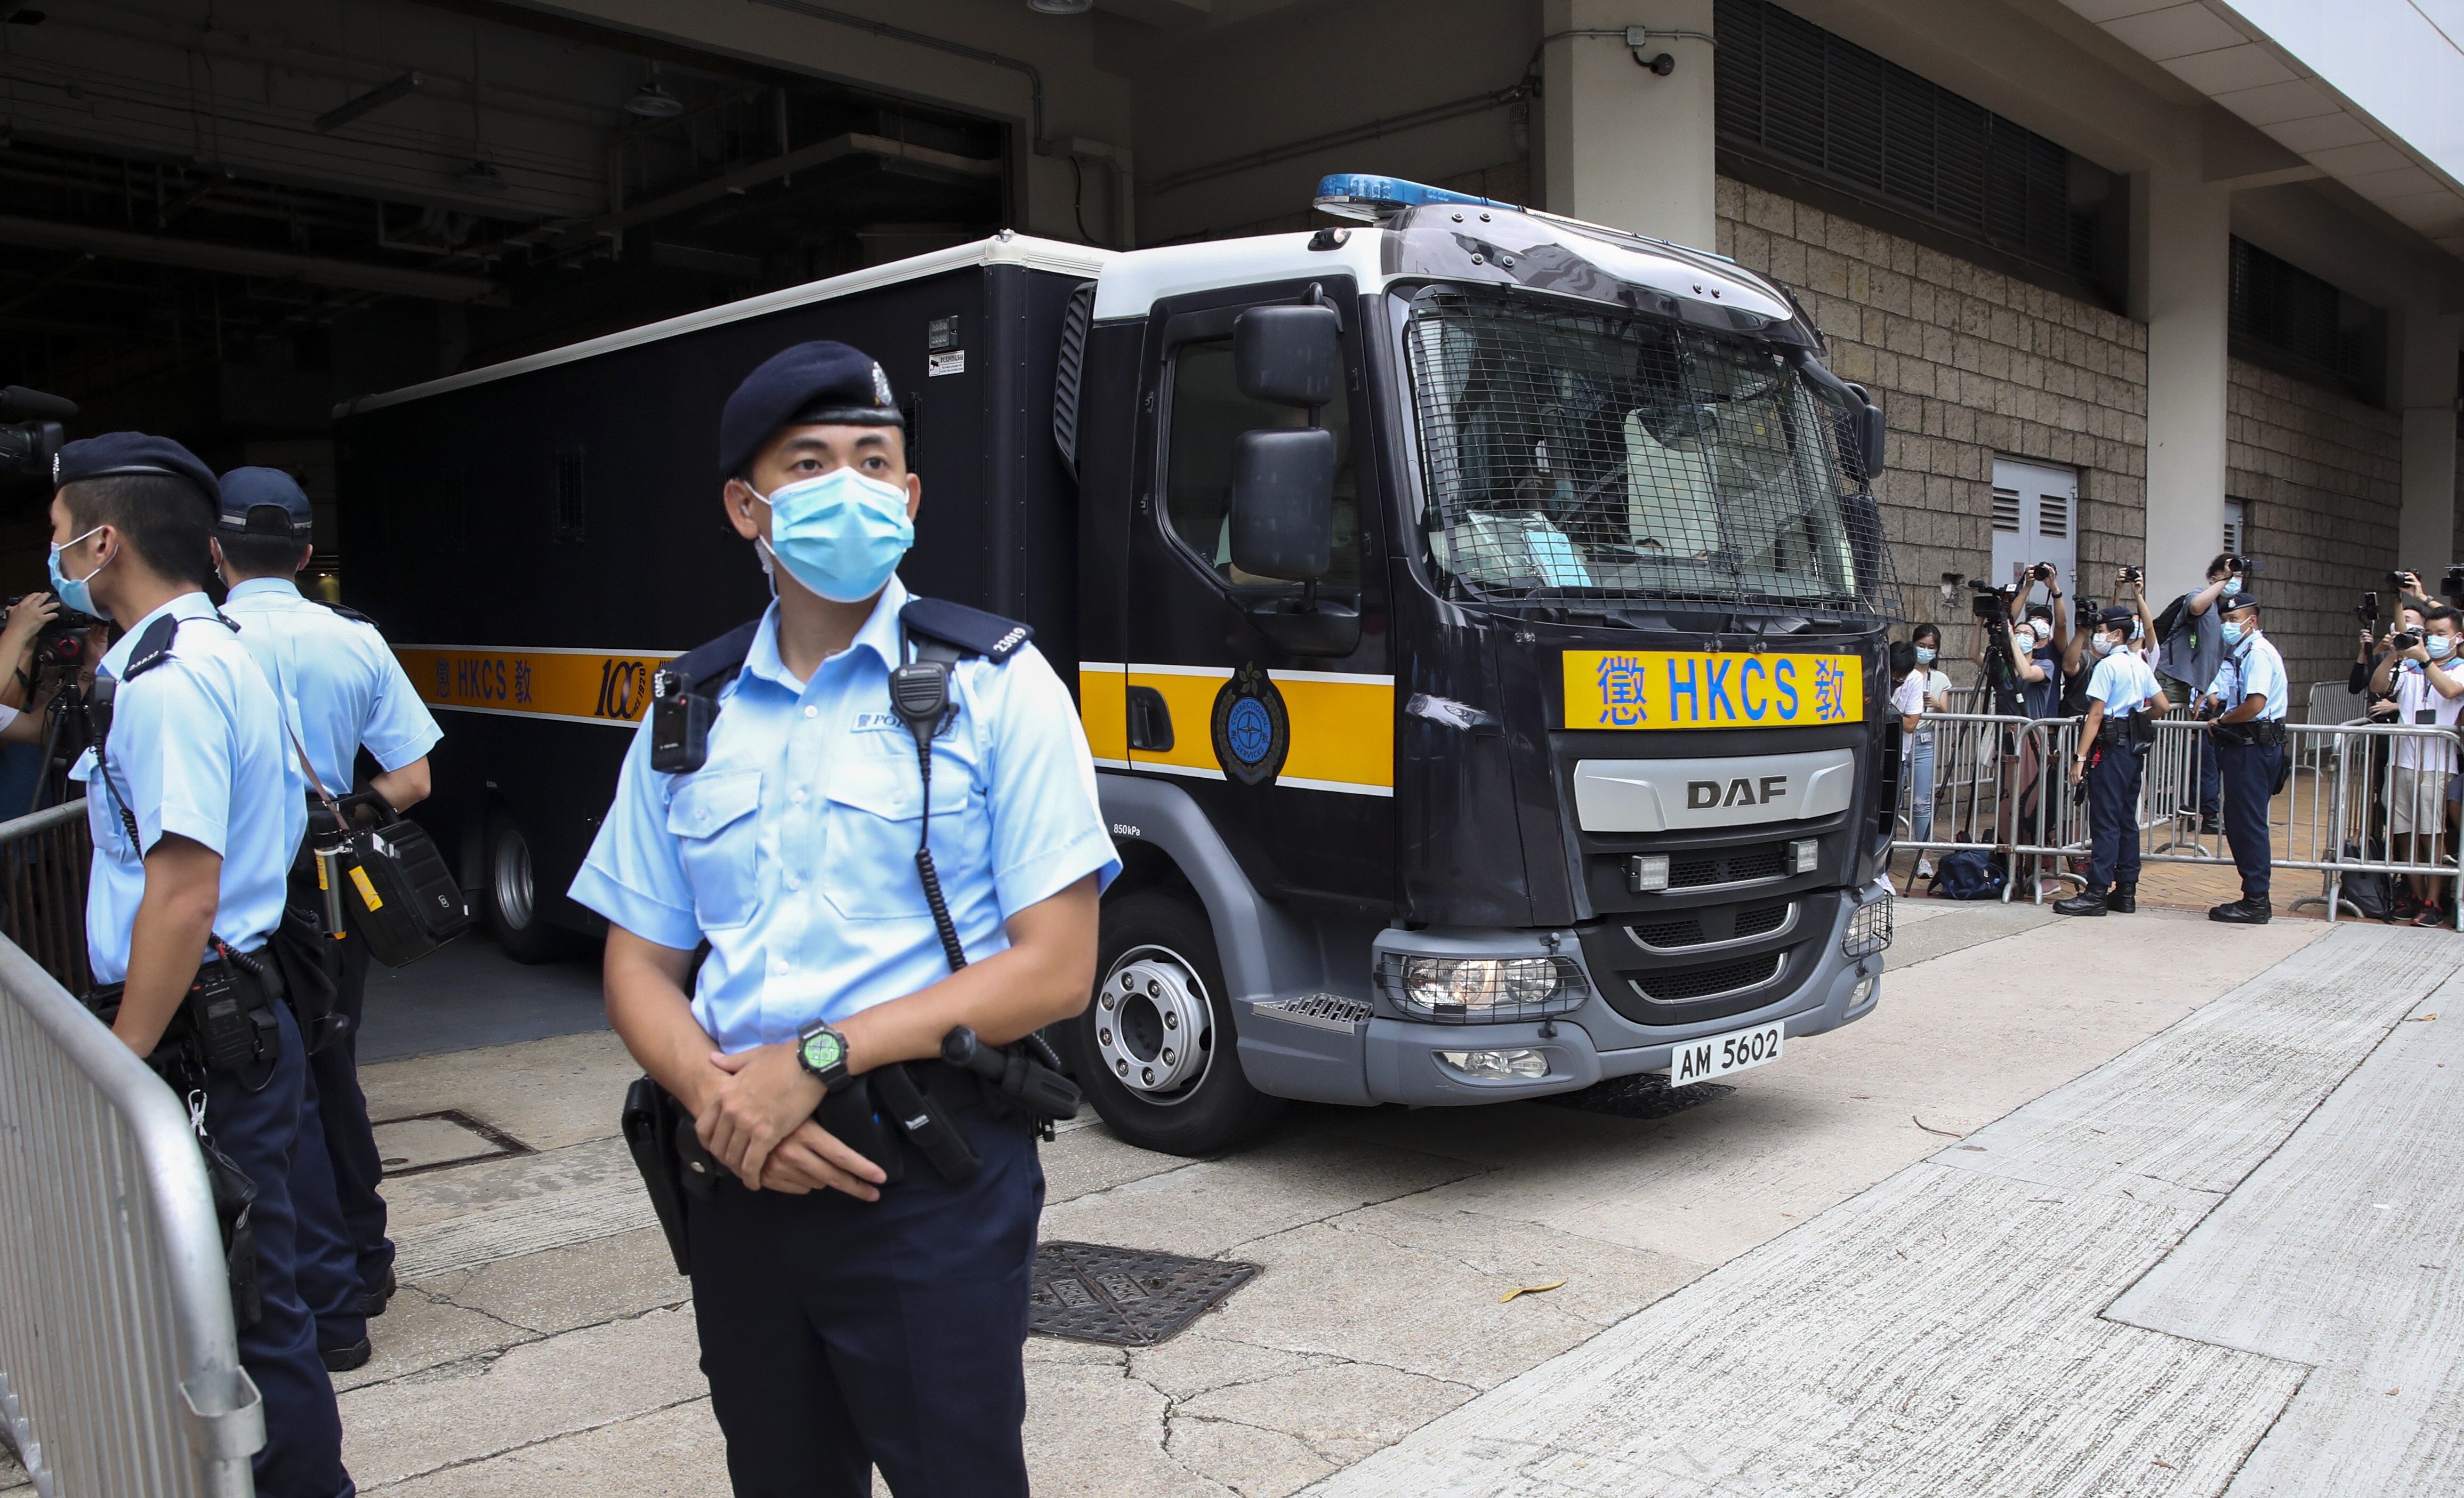 Leon Tong leaves the High Court in a prison vehicle on Friday. Photo: Edmond So